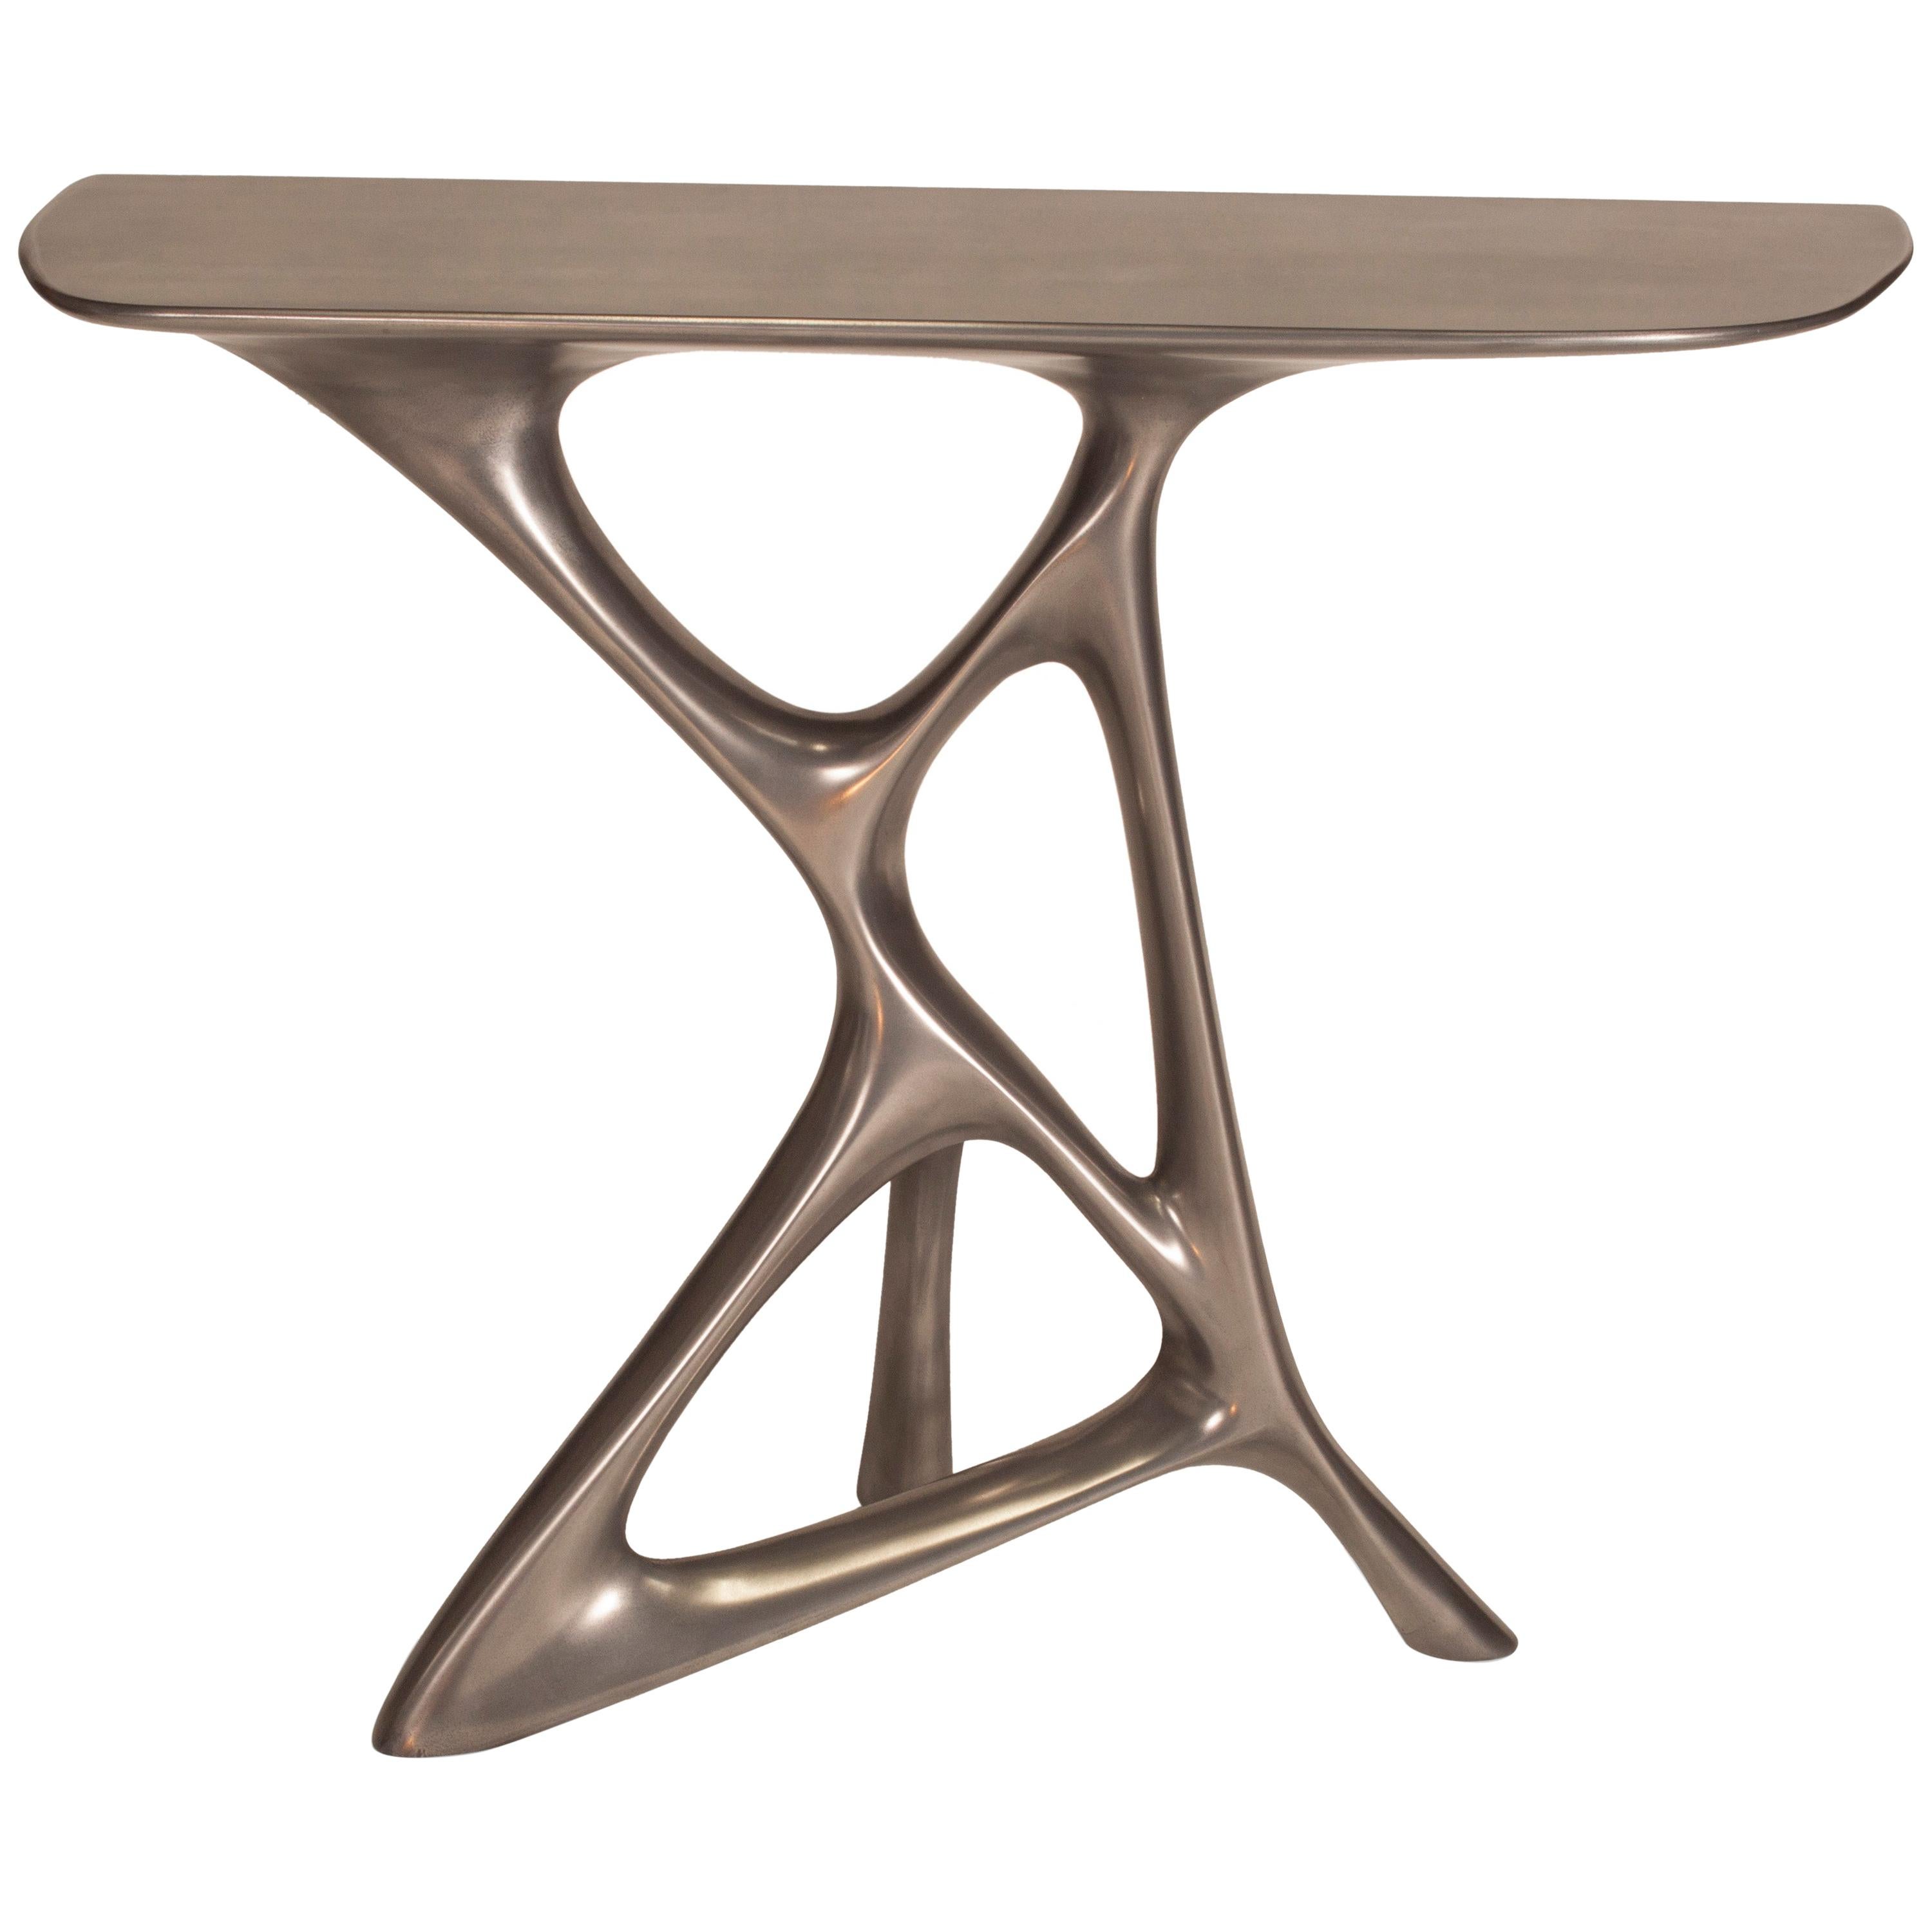 Amorph Anika Console in Stainless Steel Finish